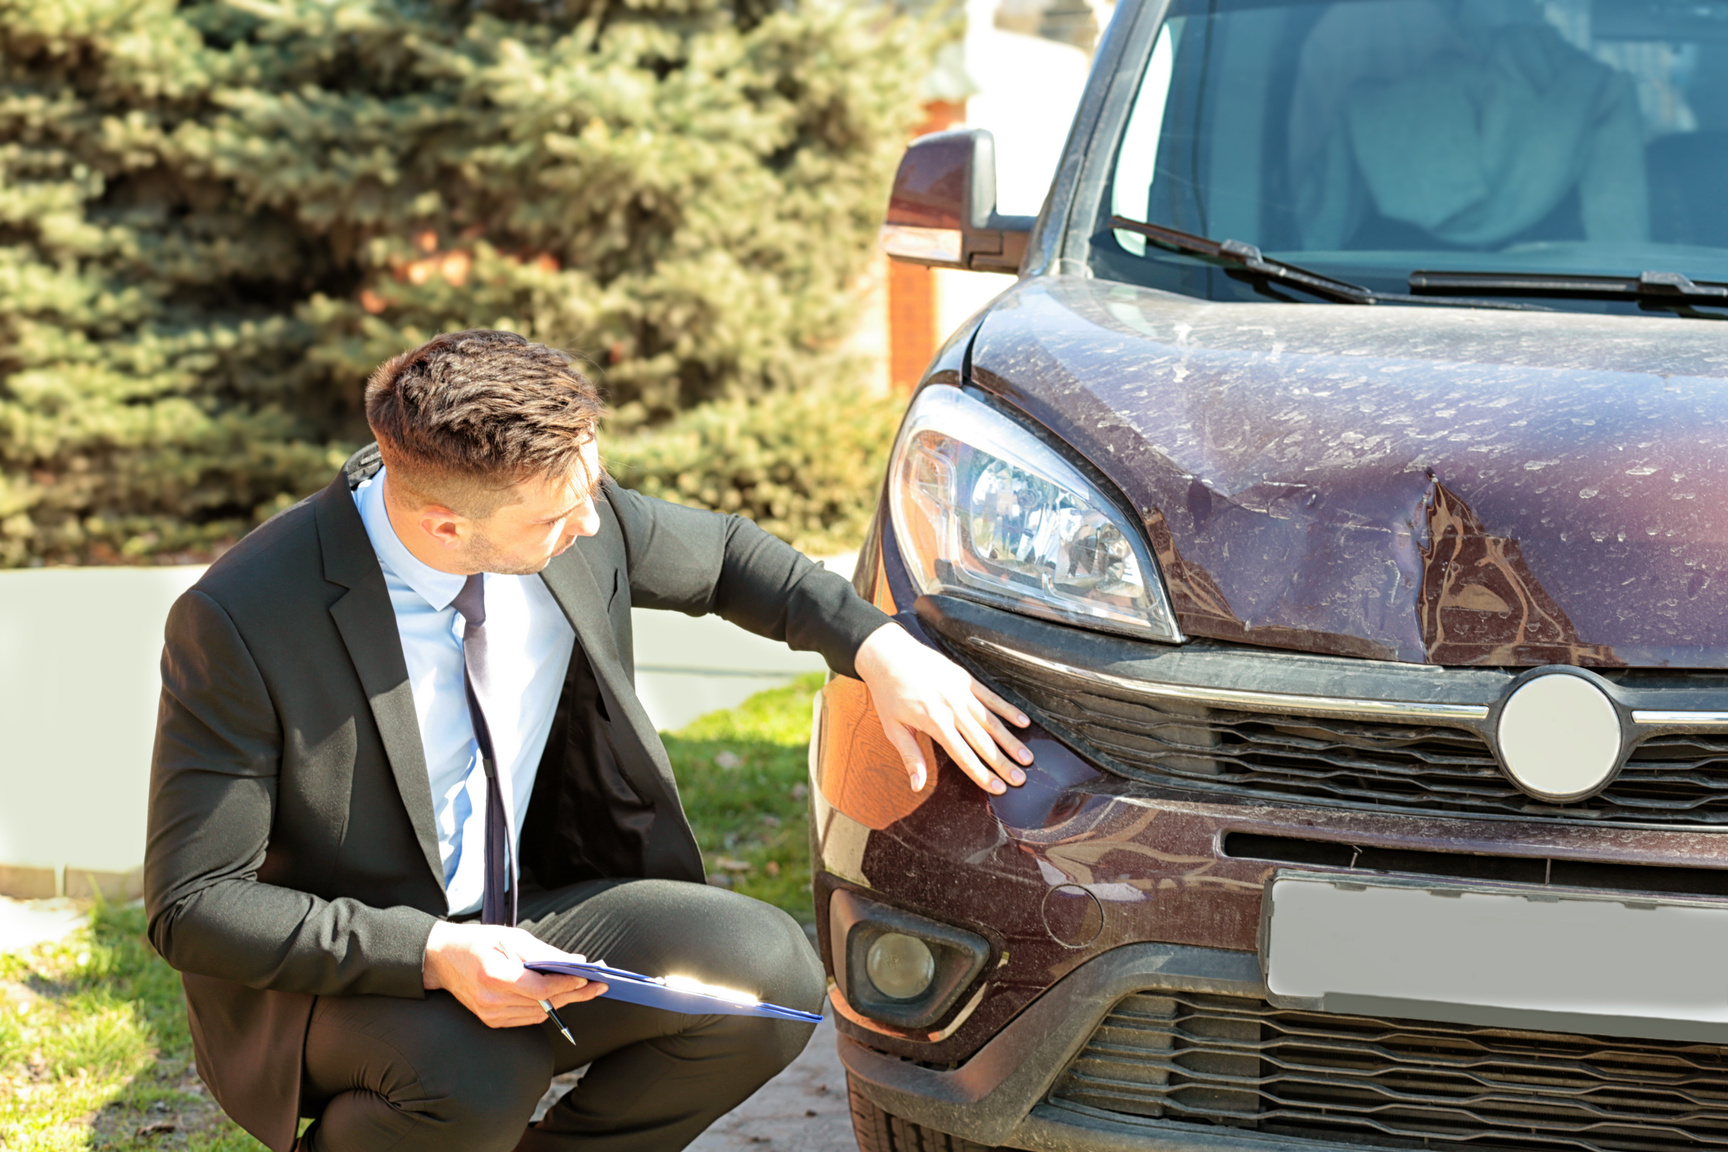 Insurance Adjuster Inspecting a Car after Accident